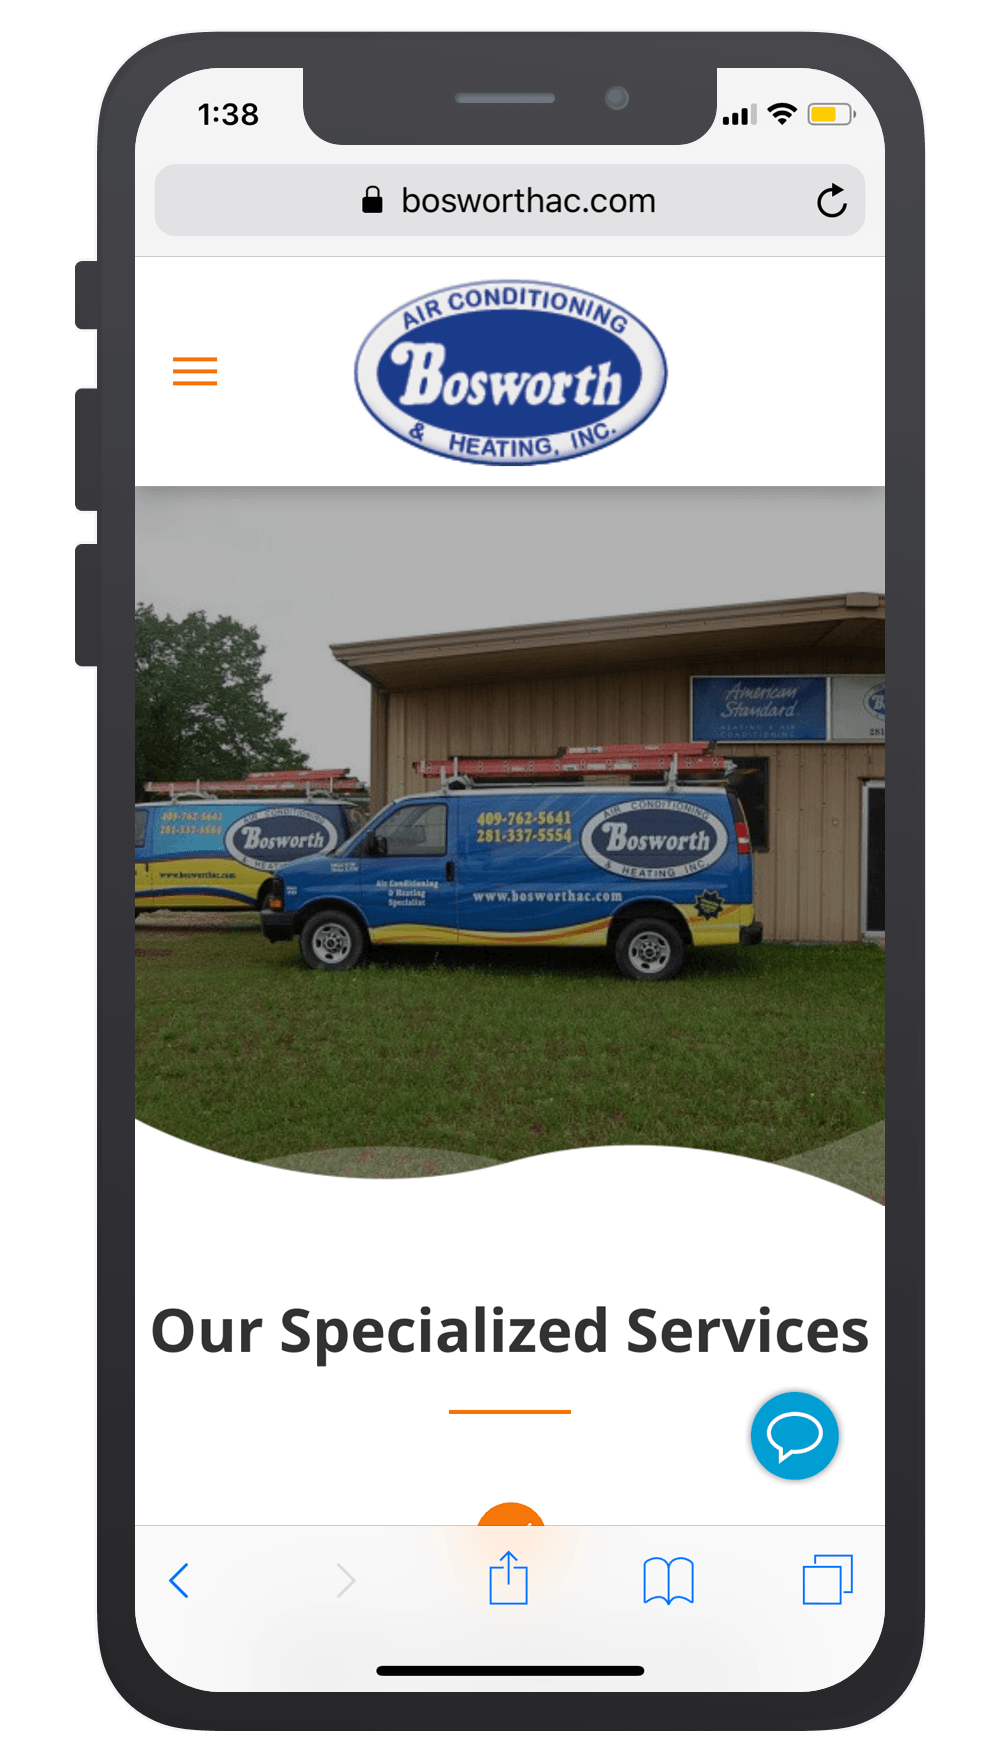 Bosworth Air Conditioning & Heating Inc.